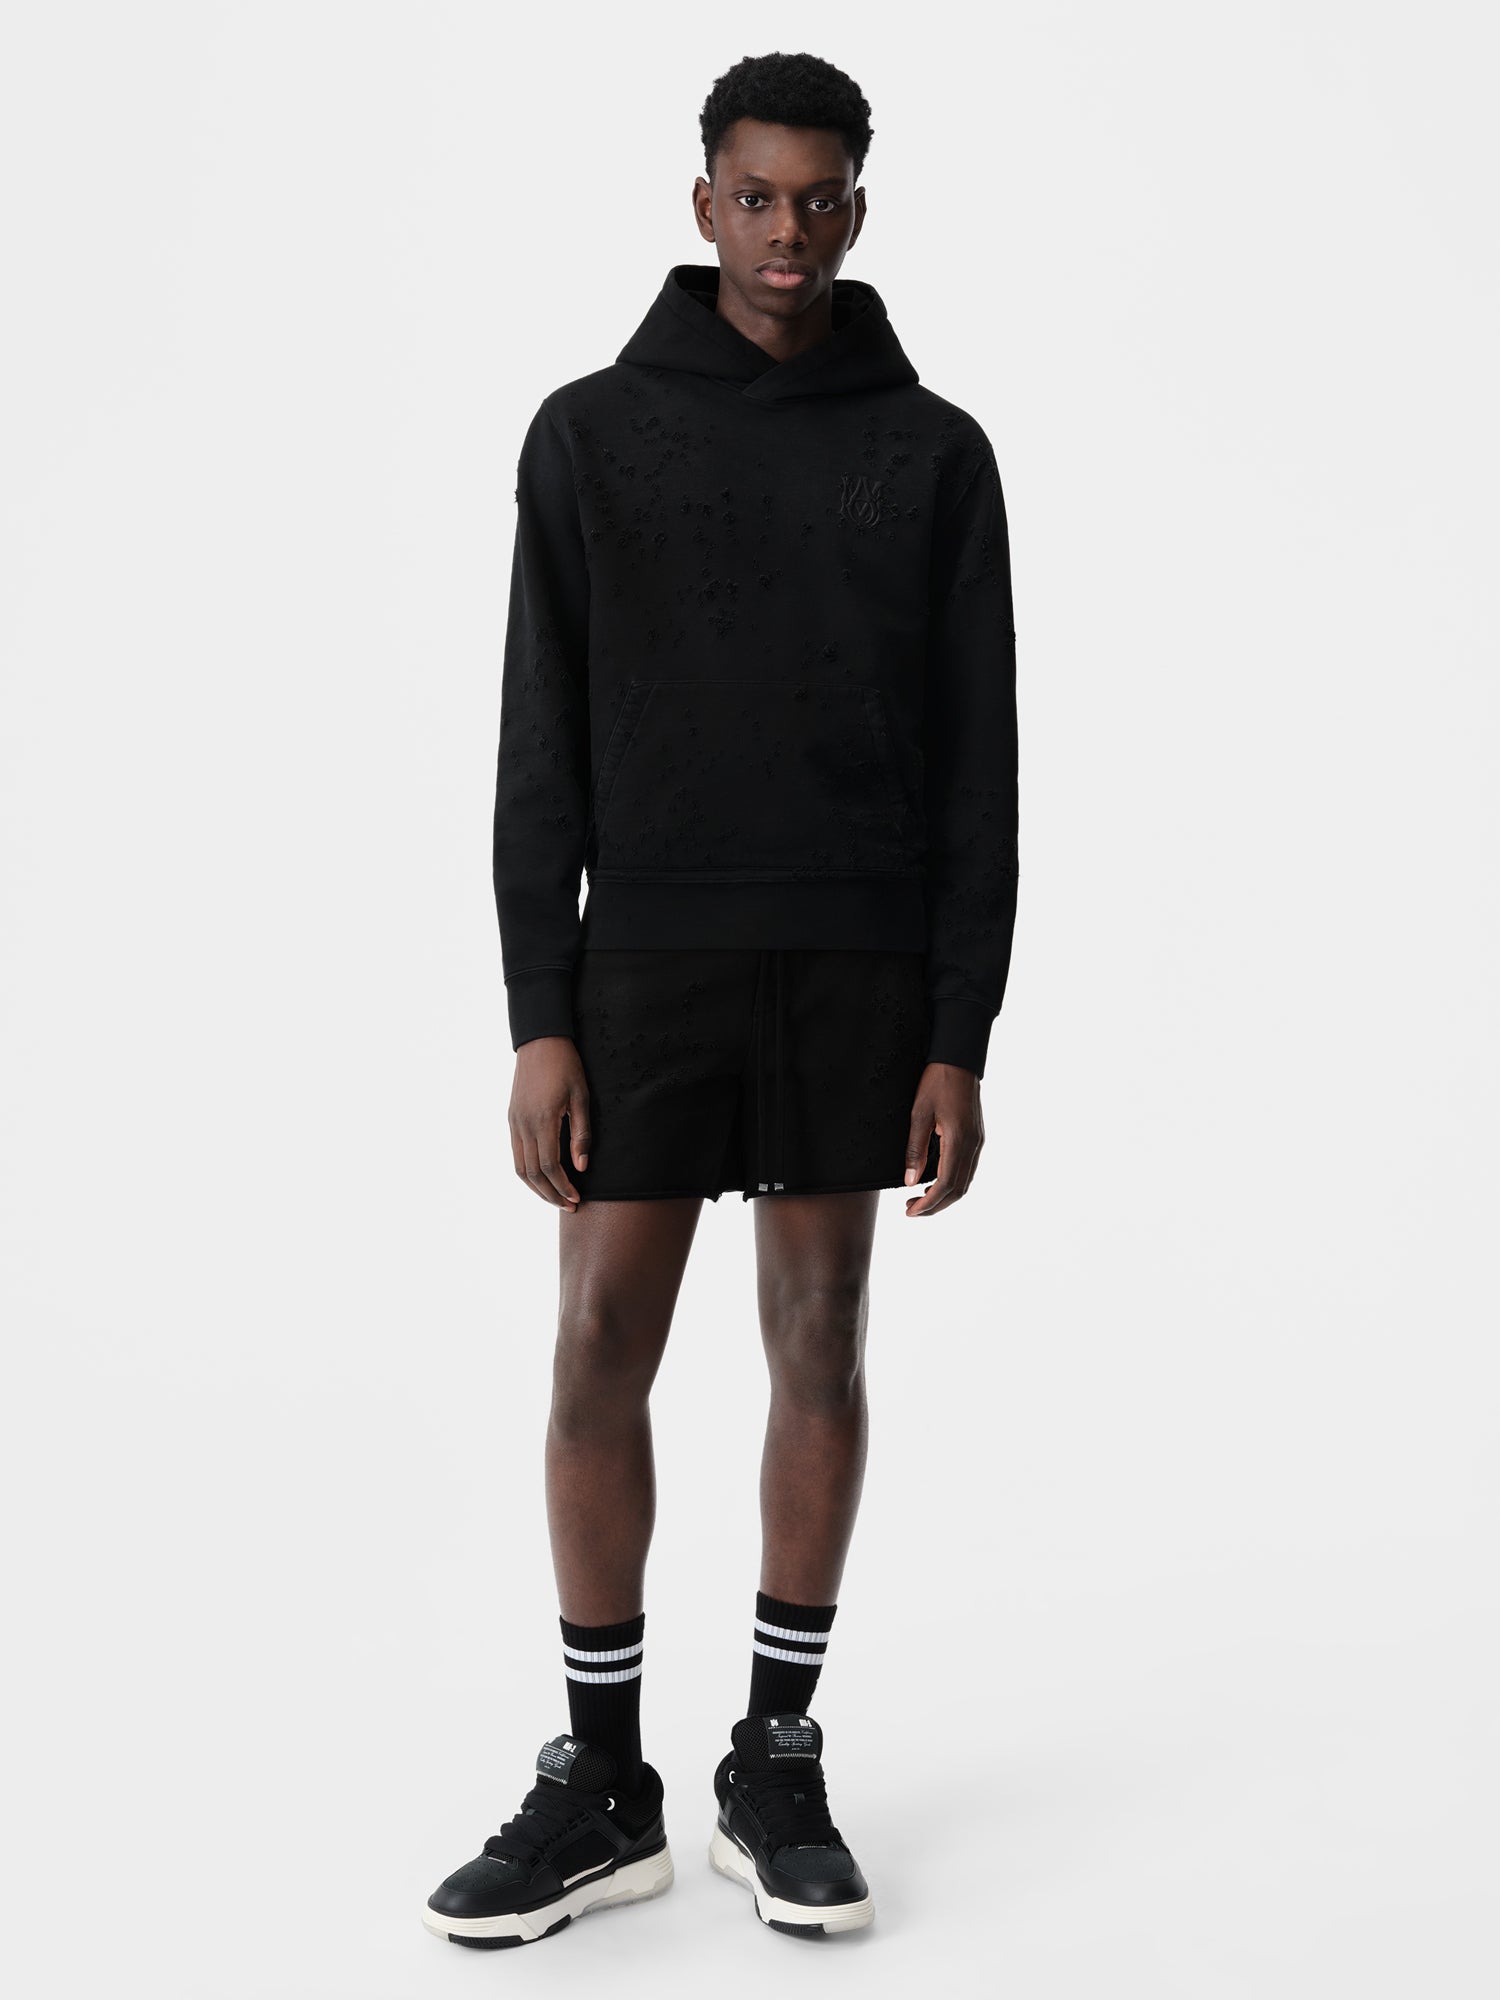 Product MA SHOTGUN EMBROIDERED HOODIE - Black featured image